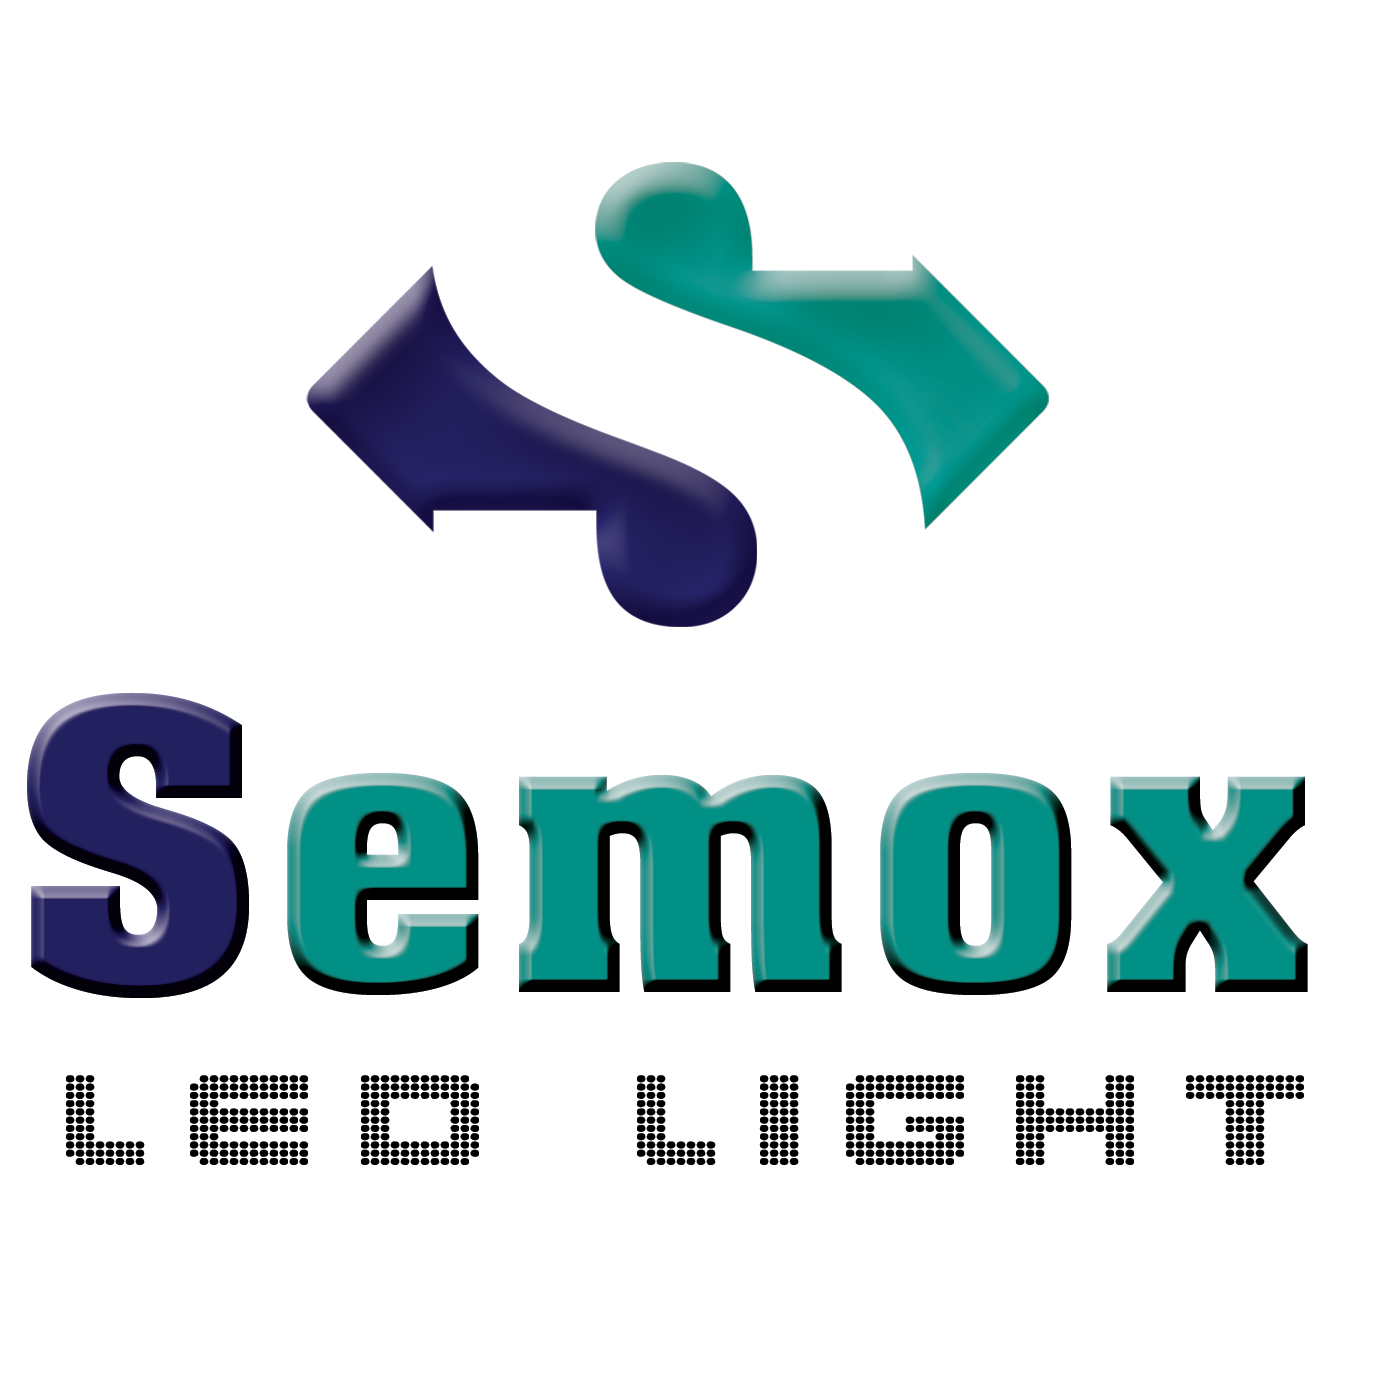 Led Lights Manufacturers And Suppliers